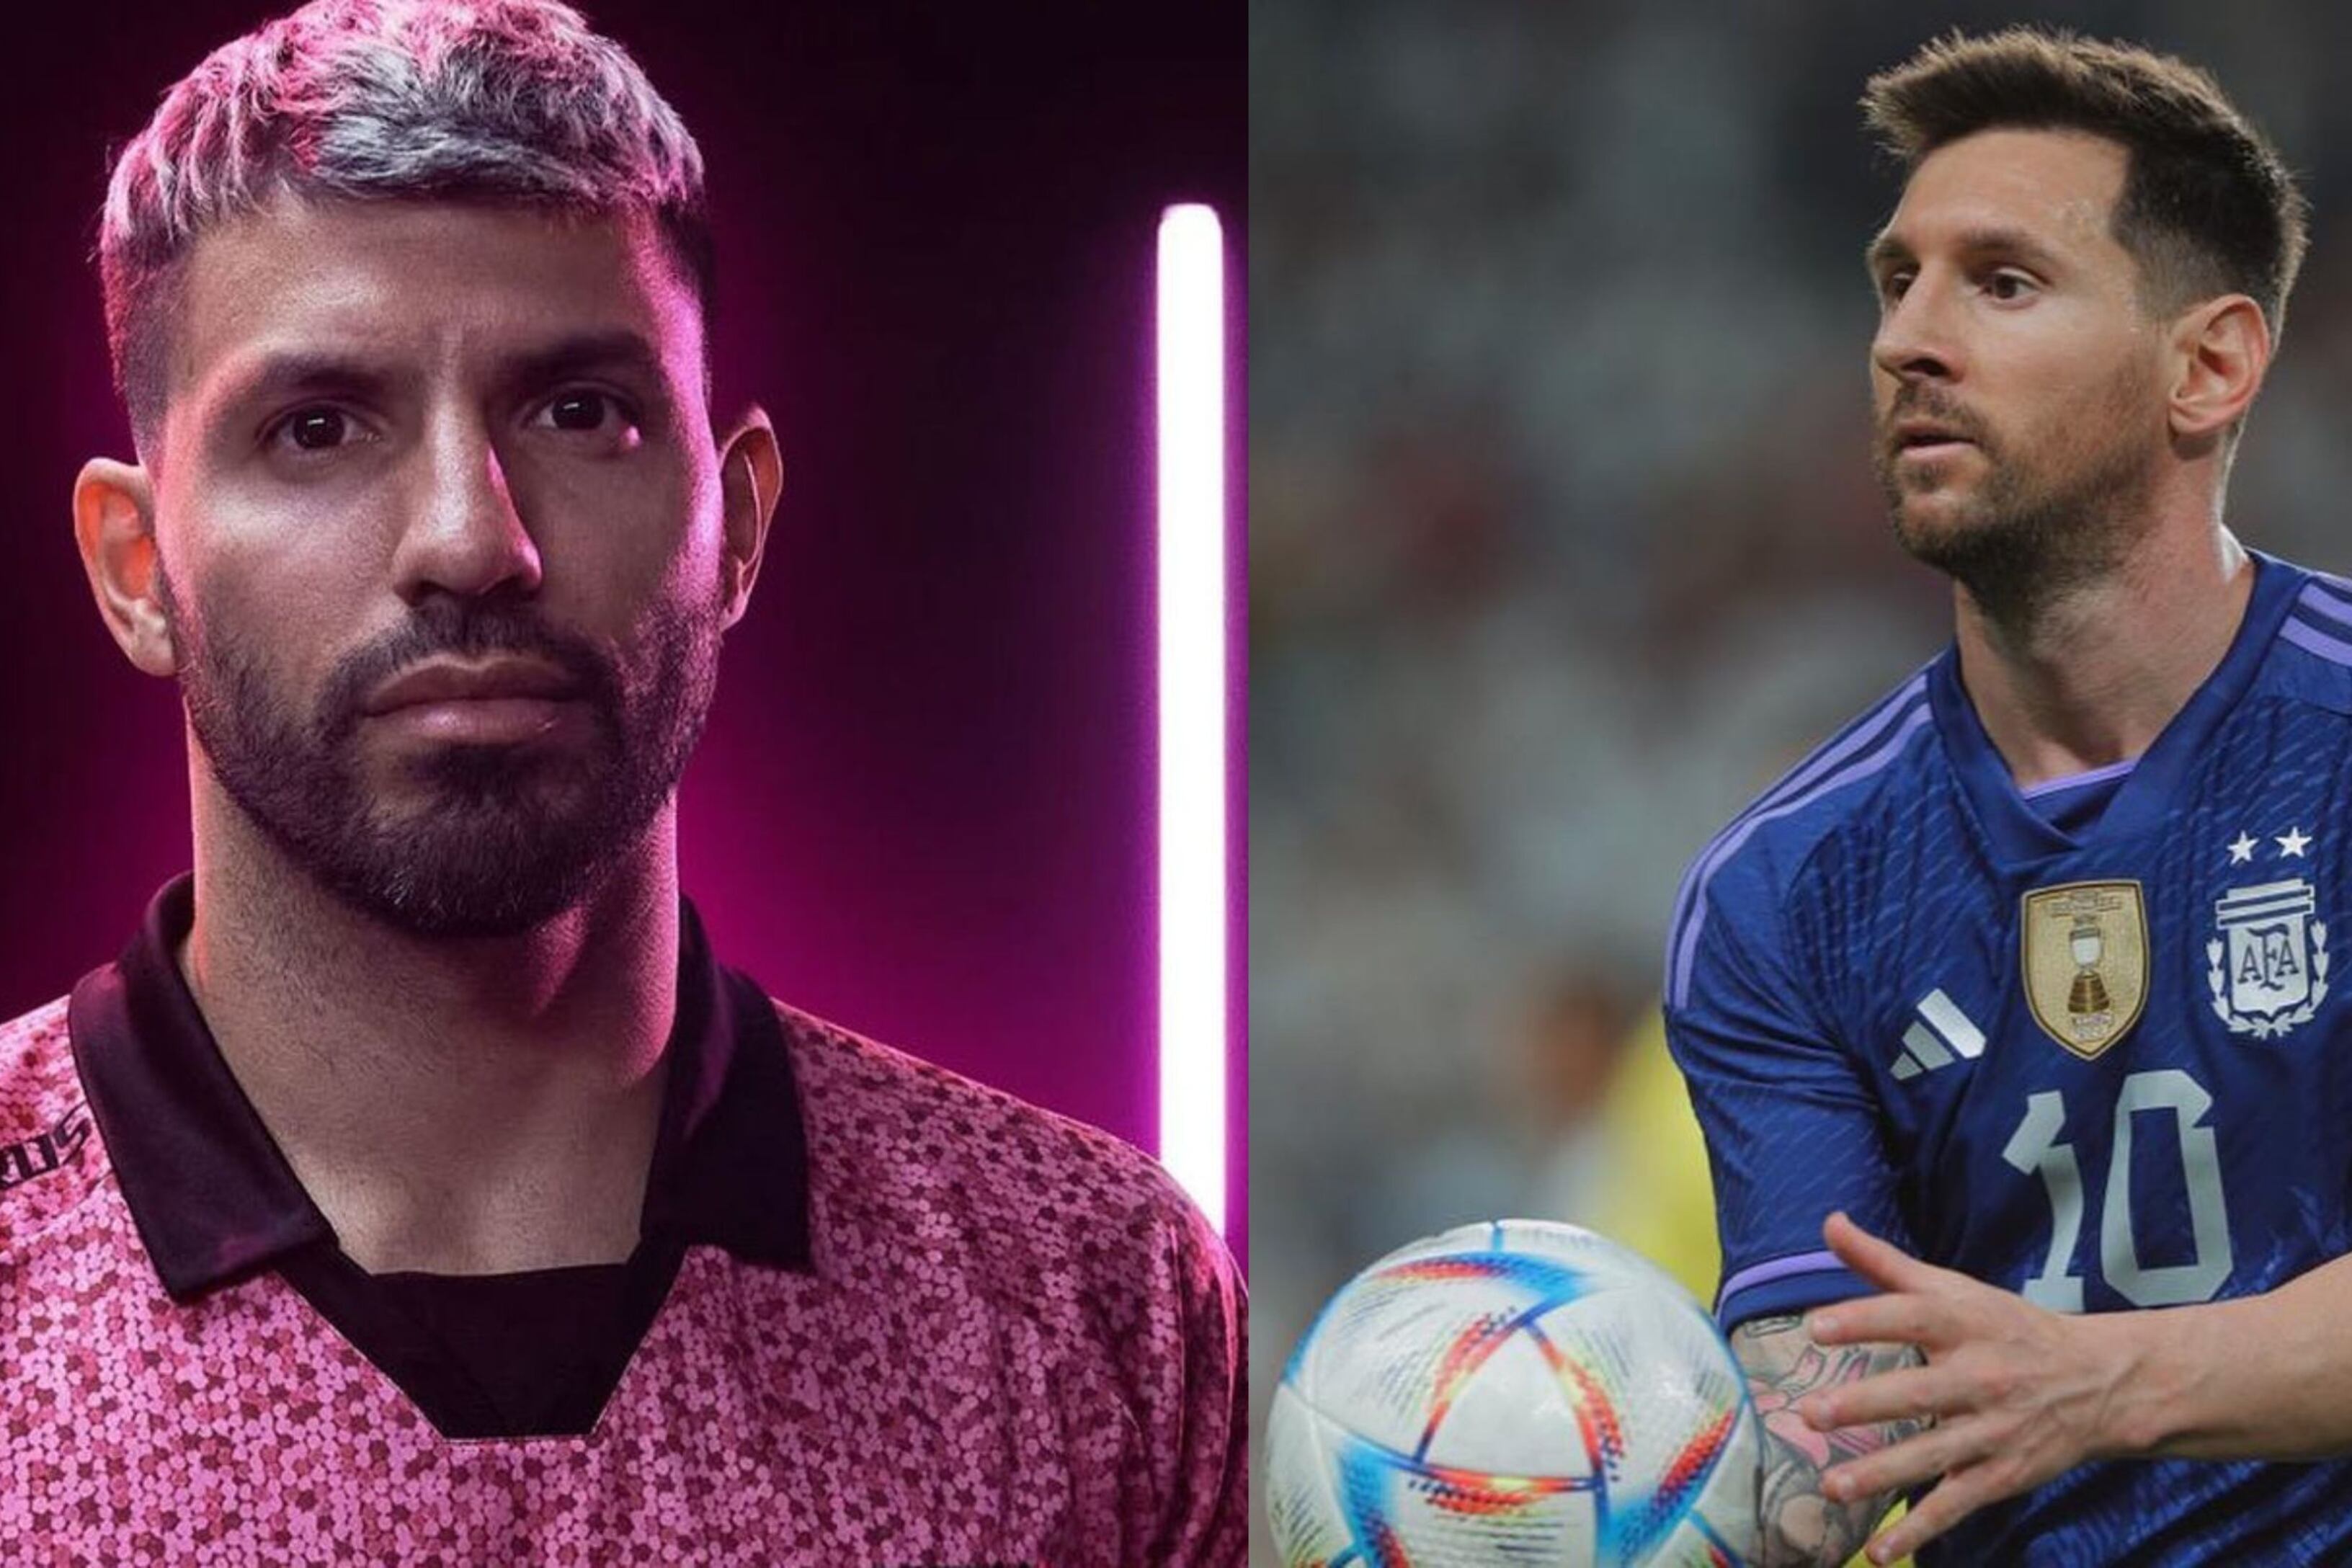 (VIDEO) While Messi earns 50 million in Inter Miami, the new millionaire business he got into with Aguero